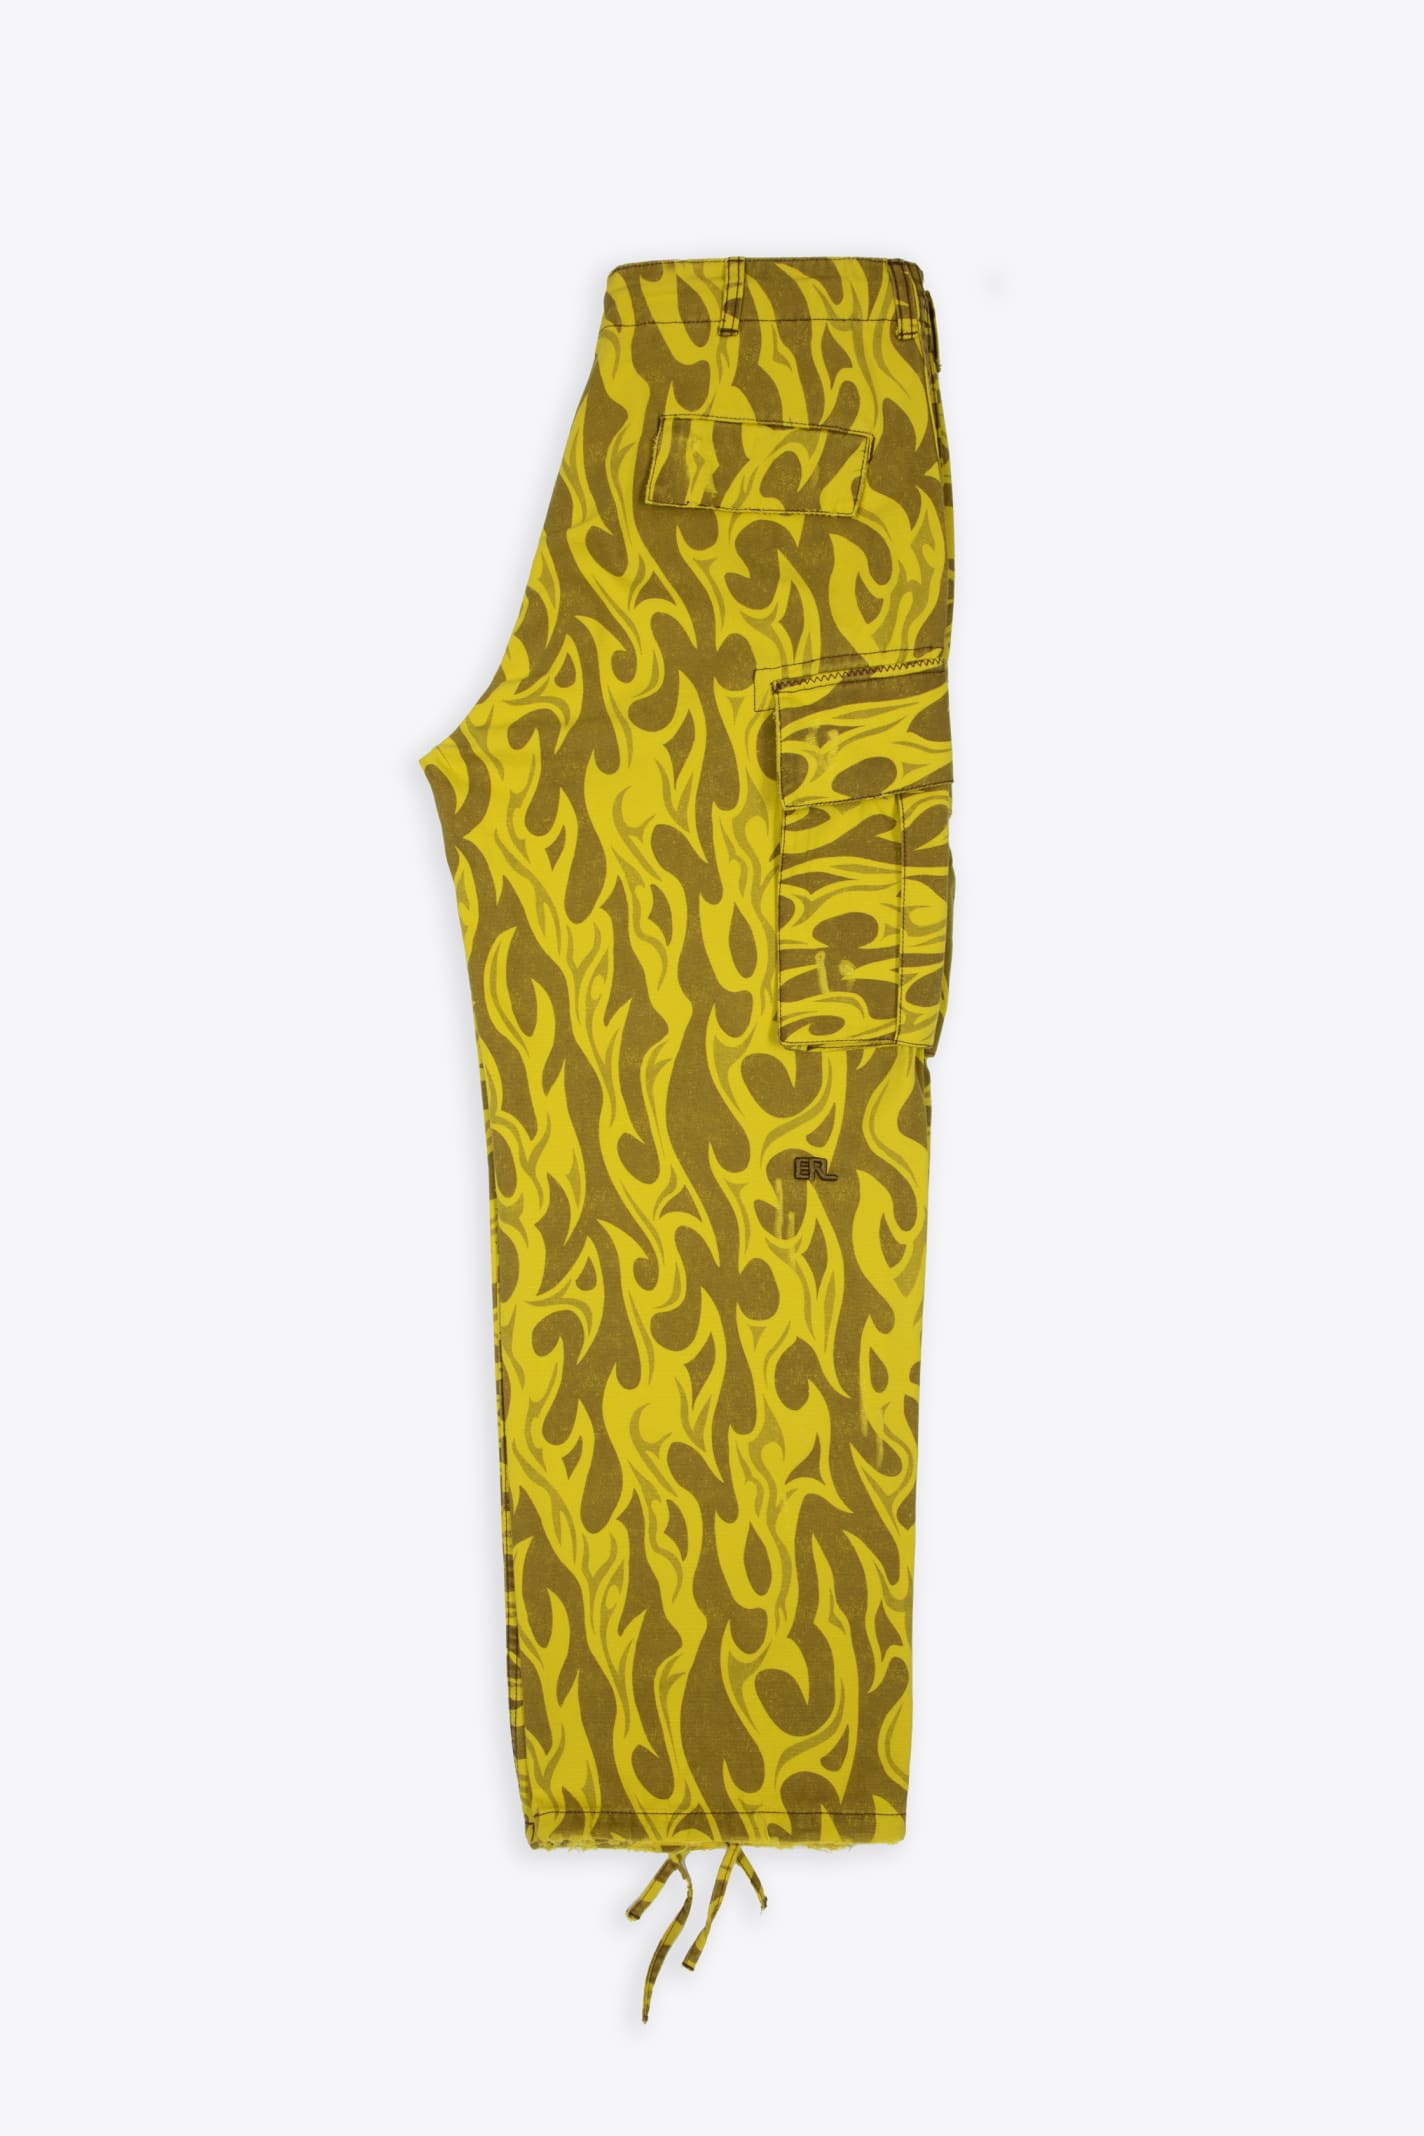 Shop Erl Unisex Printed Cargo Pants Woven Yellow Canvas Printed Cargo Pant - Unisex Printed Cargo Pants Woven In Giallo